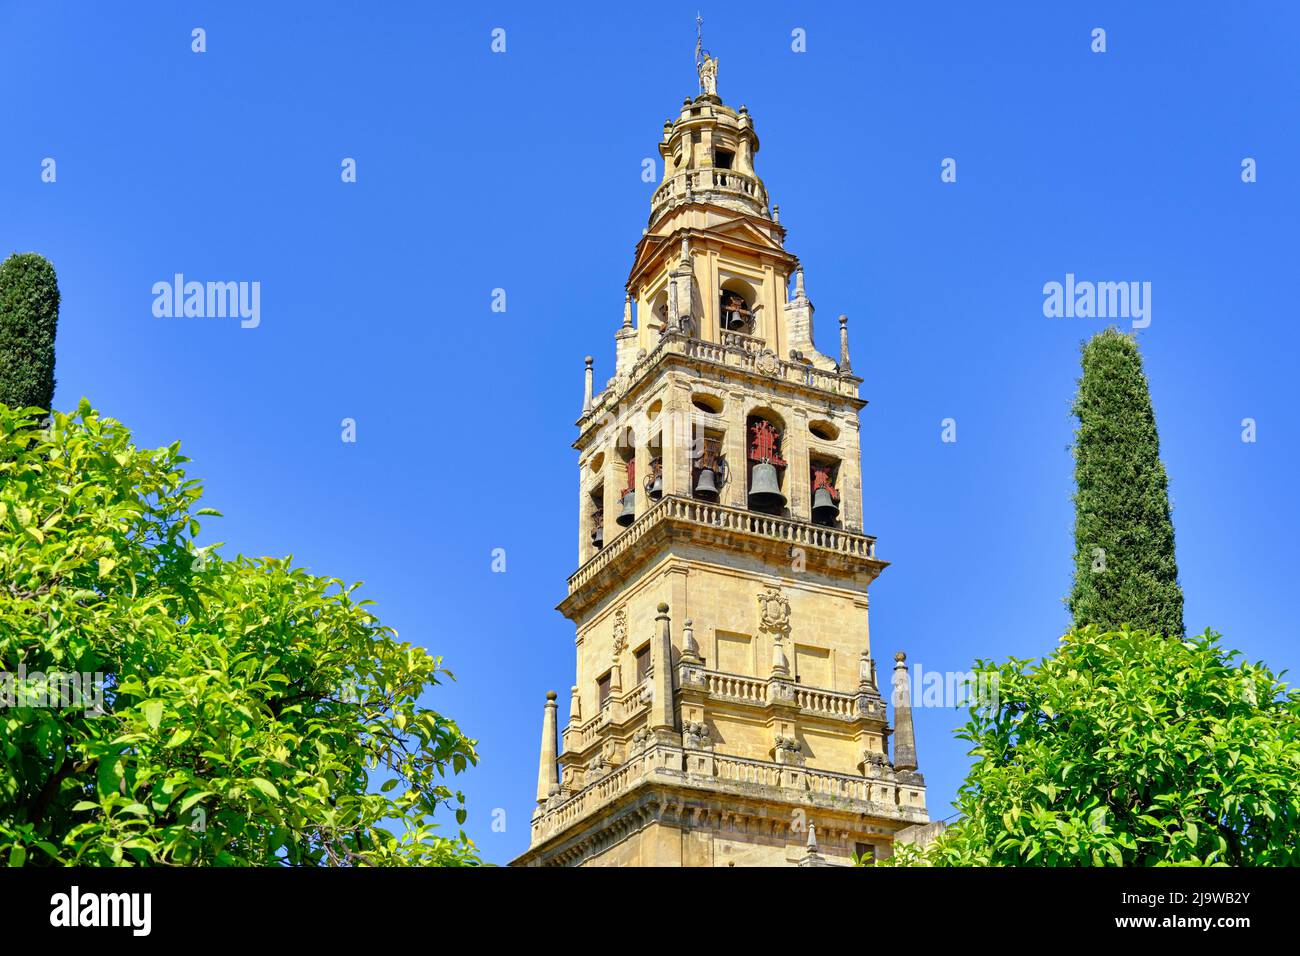 The Bell Tower of the Mezquita-Catedral (Mosque-Cathedral) of Cordoba, a UNESCO World Heritage Site. Patio de los Naranjos. Andalucia, Spain Stock Photo